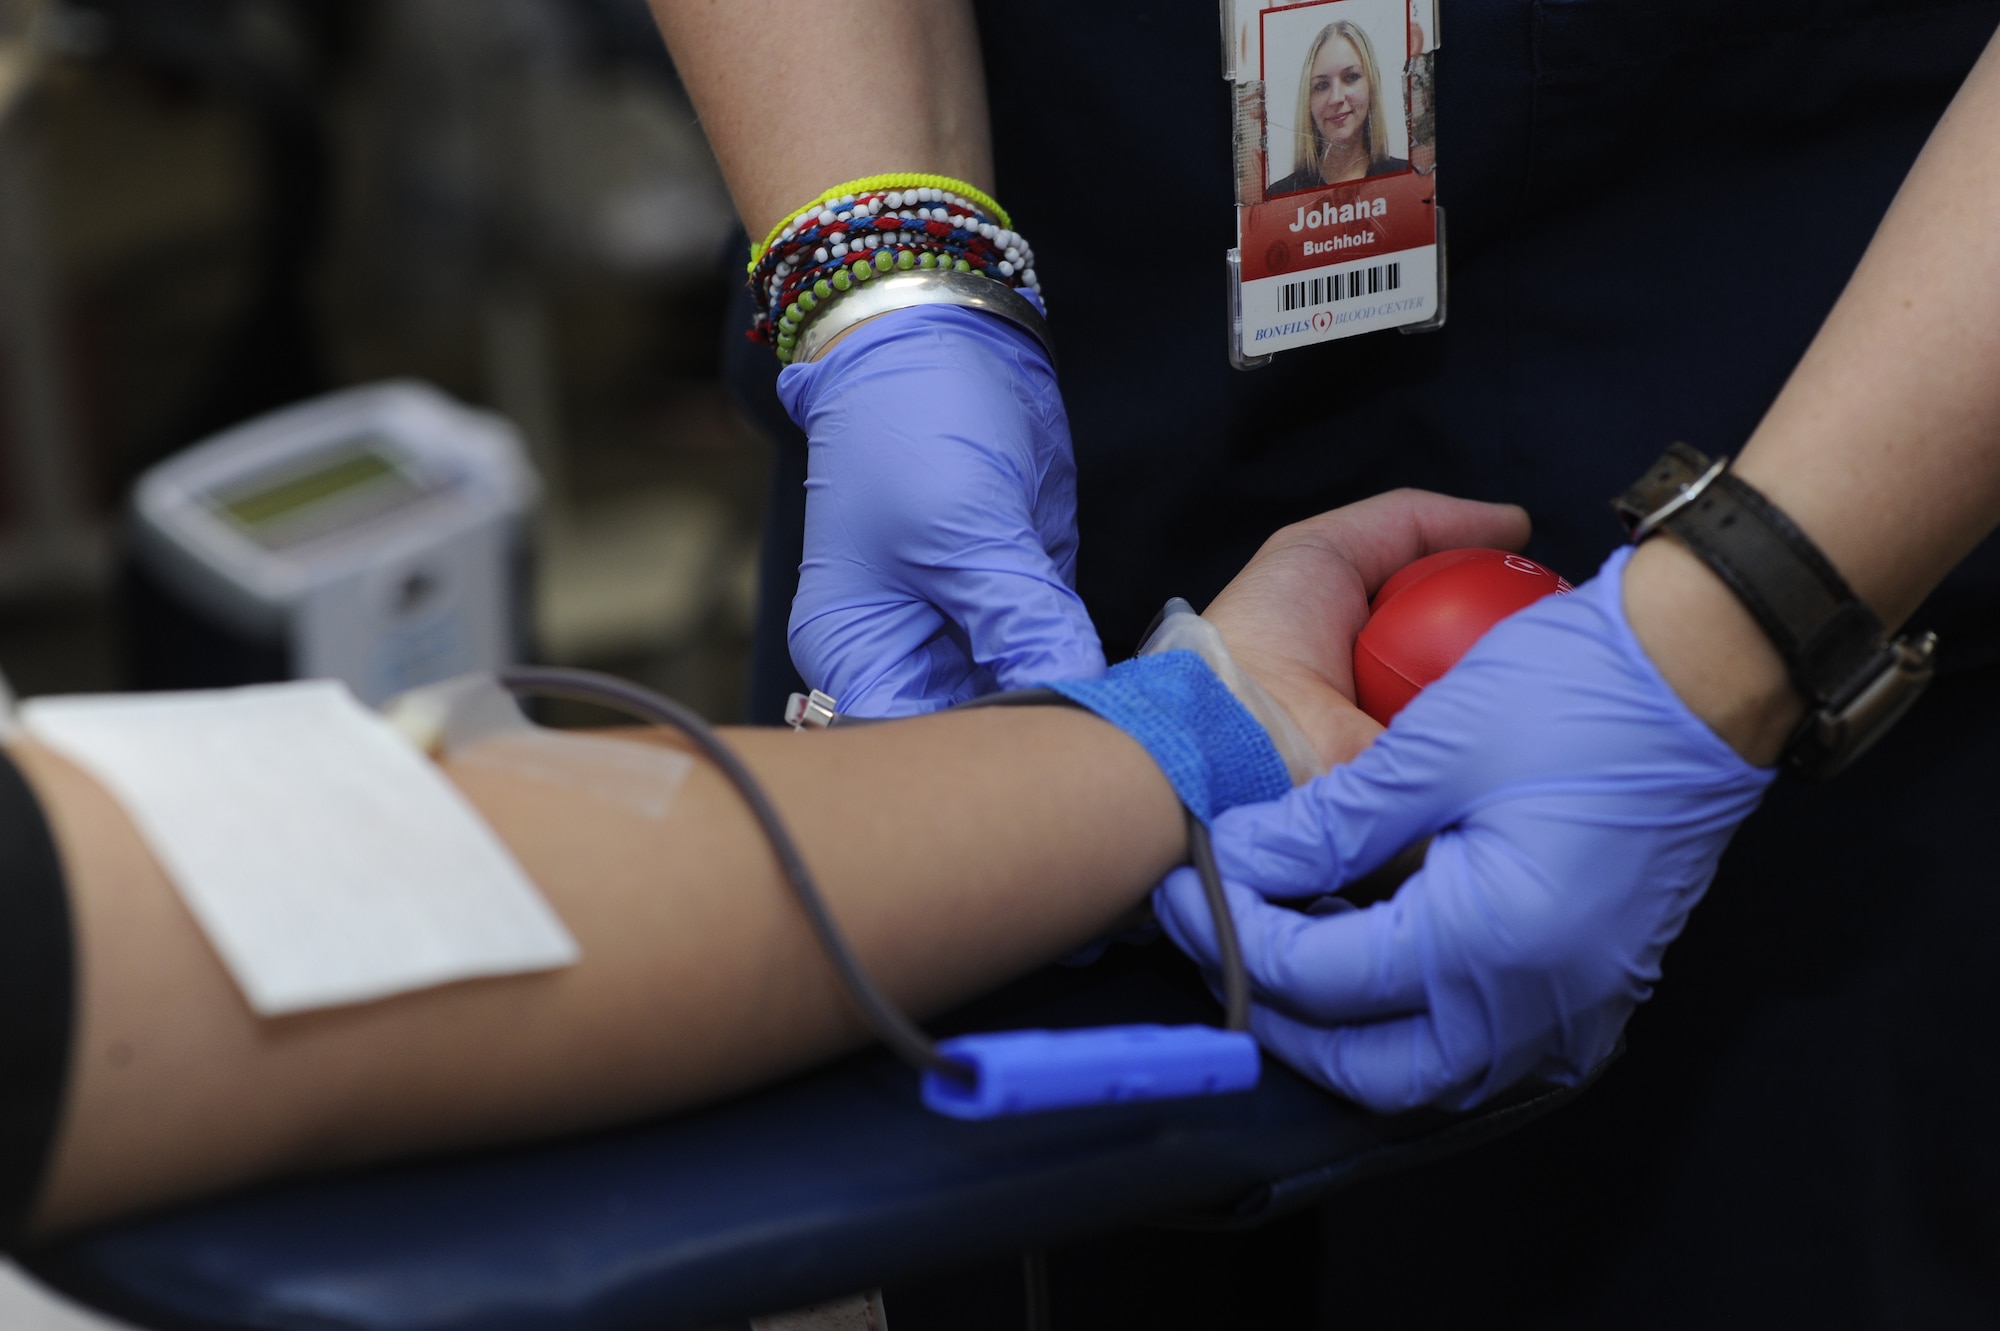 A phlebotomist situates donation tubes during a blood drive May 5, 2014, in the health and wellness center on Buckley Air Force Base, Colo. According to the American Red Cross, more than 41,000 blood donations are needed every day. (U.S. Air Force photo by Airman 1st Class Samantha Saulsbury/Released)